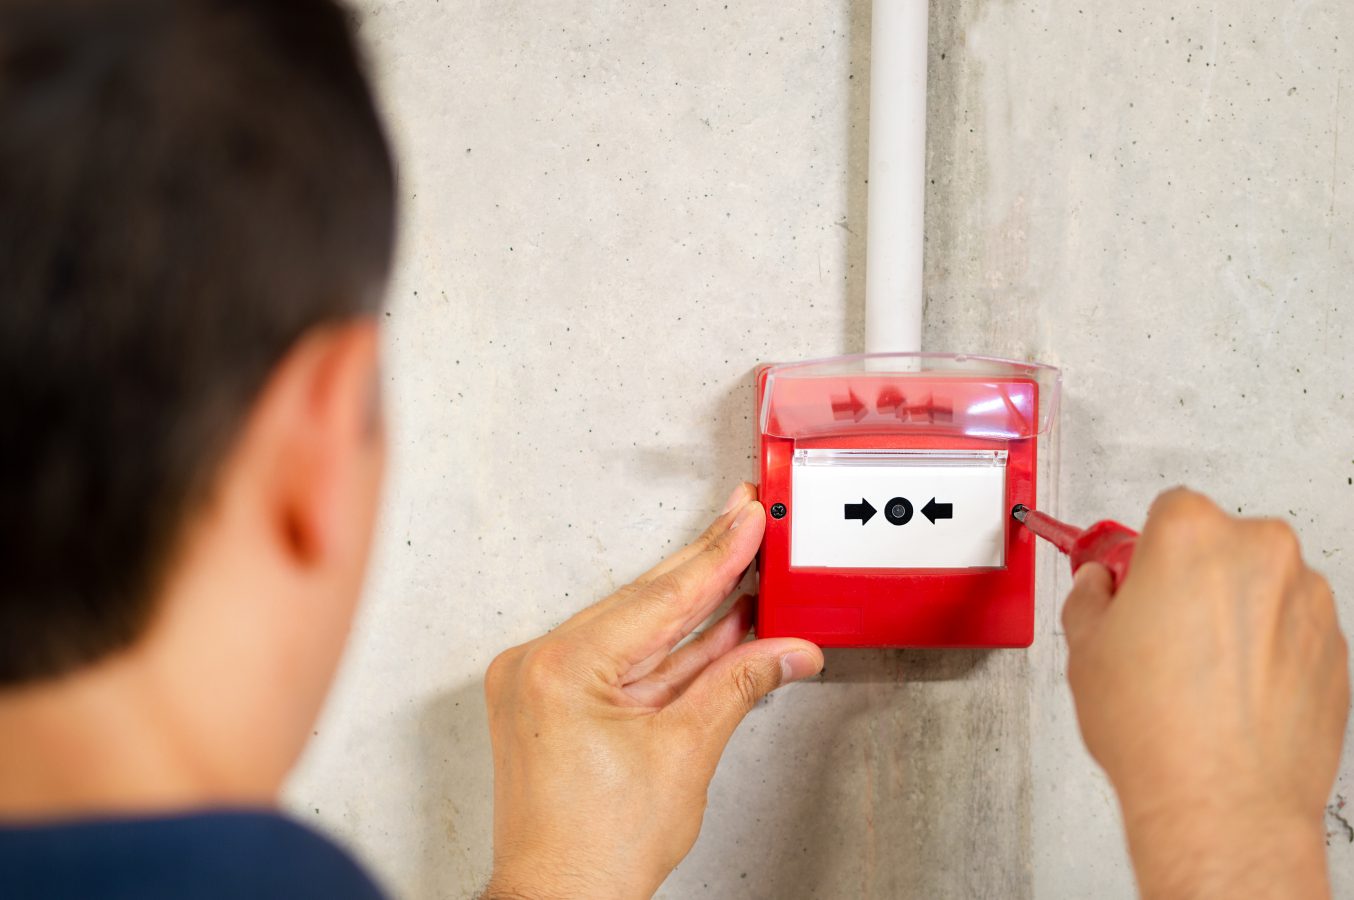 How To Connect Fire Alarm Systems